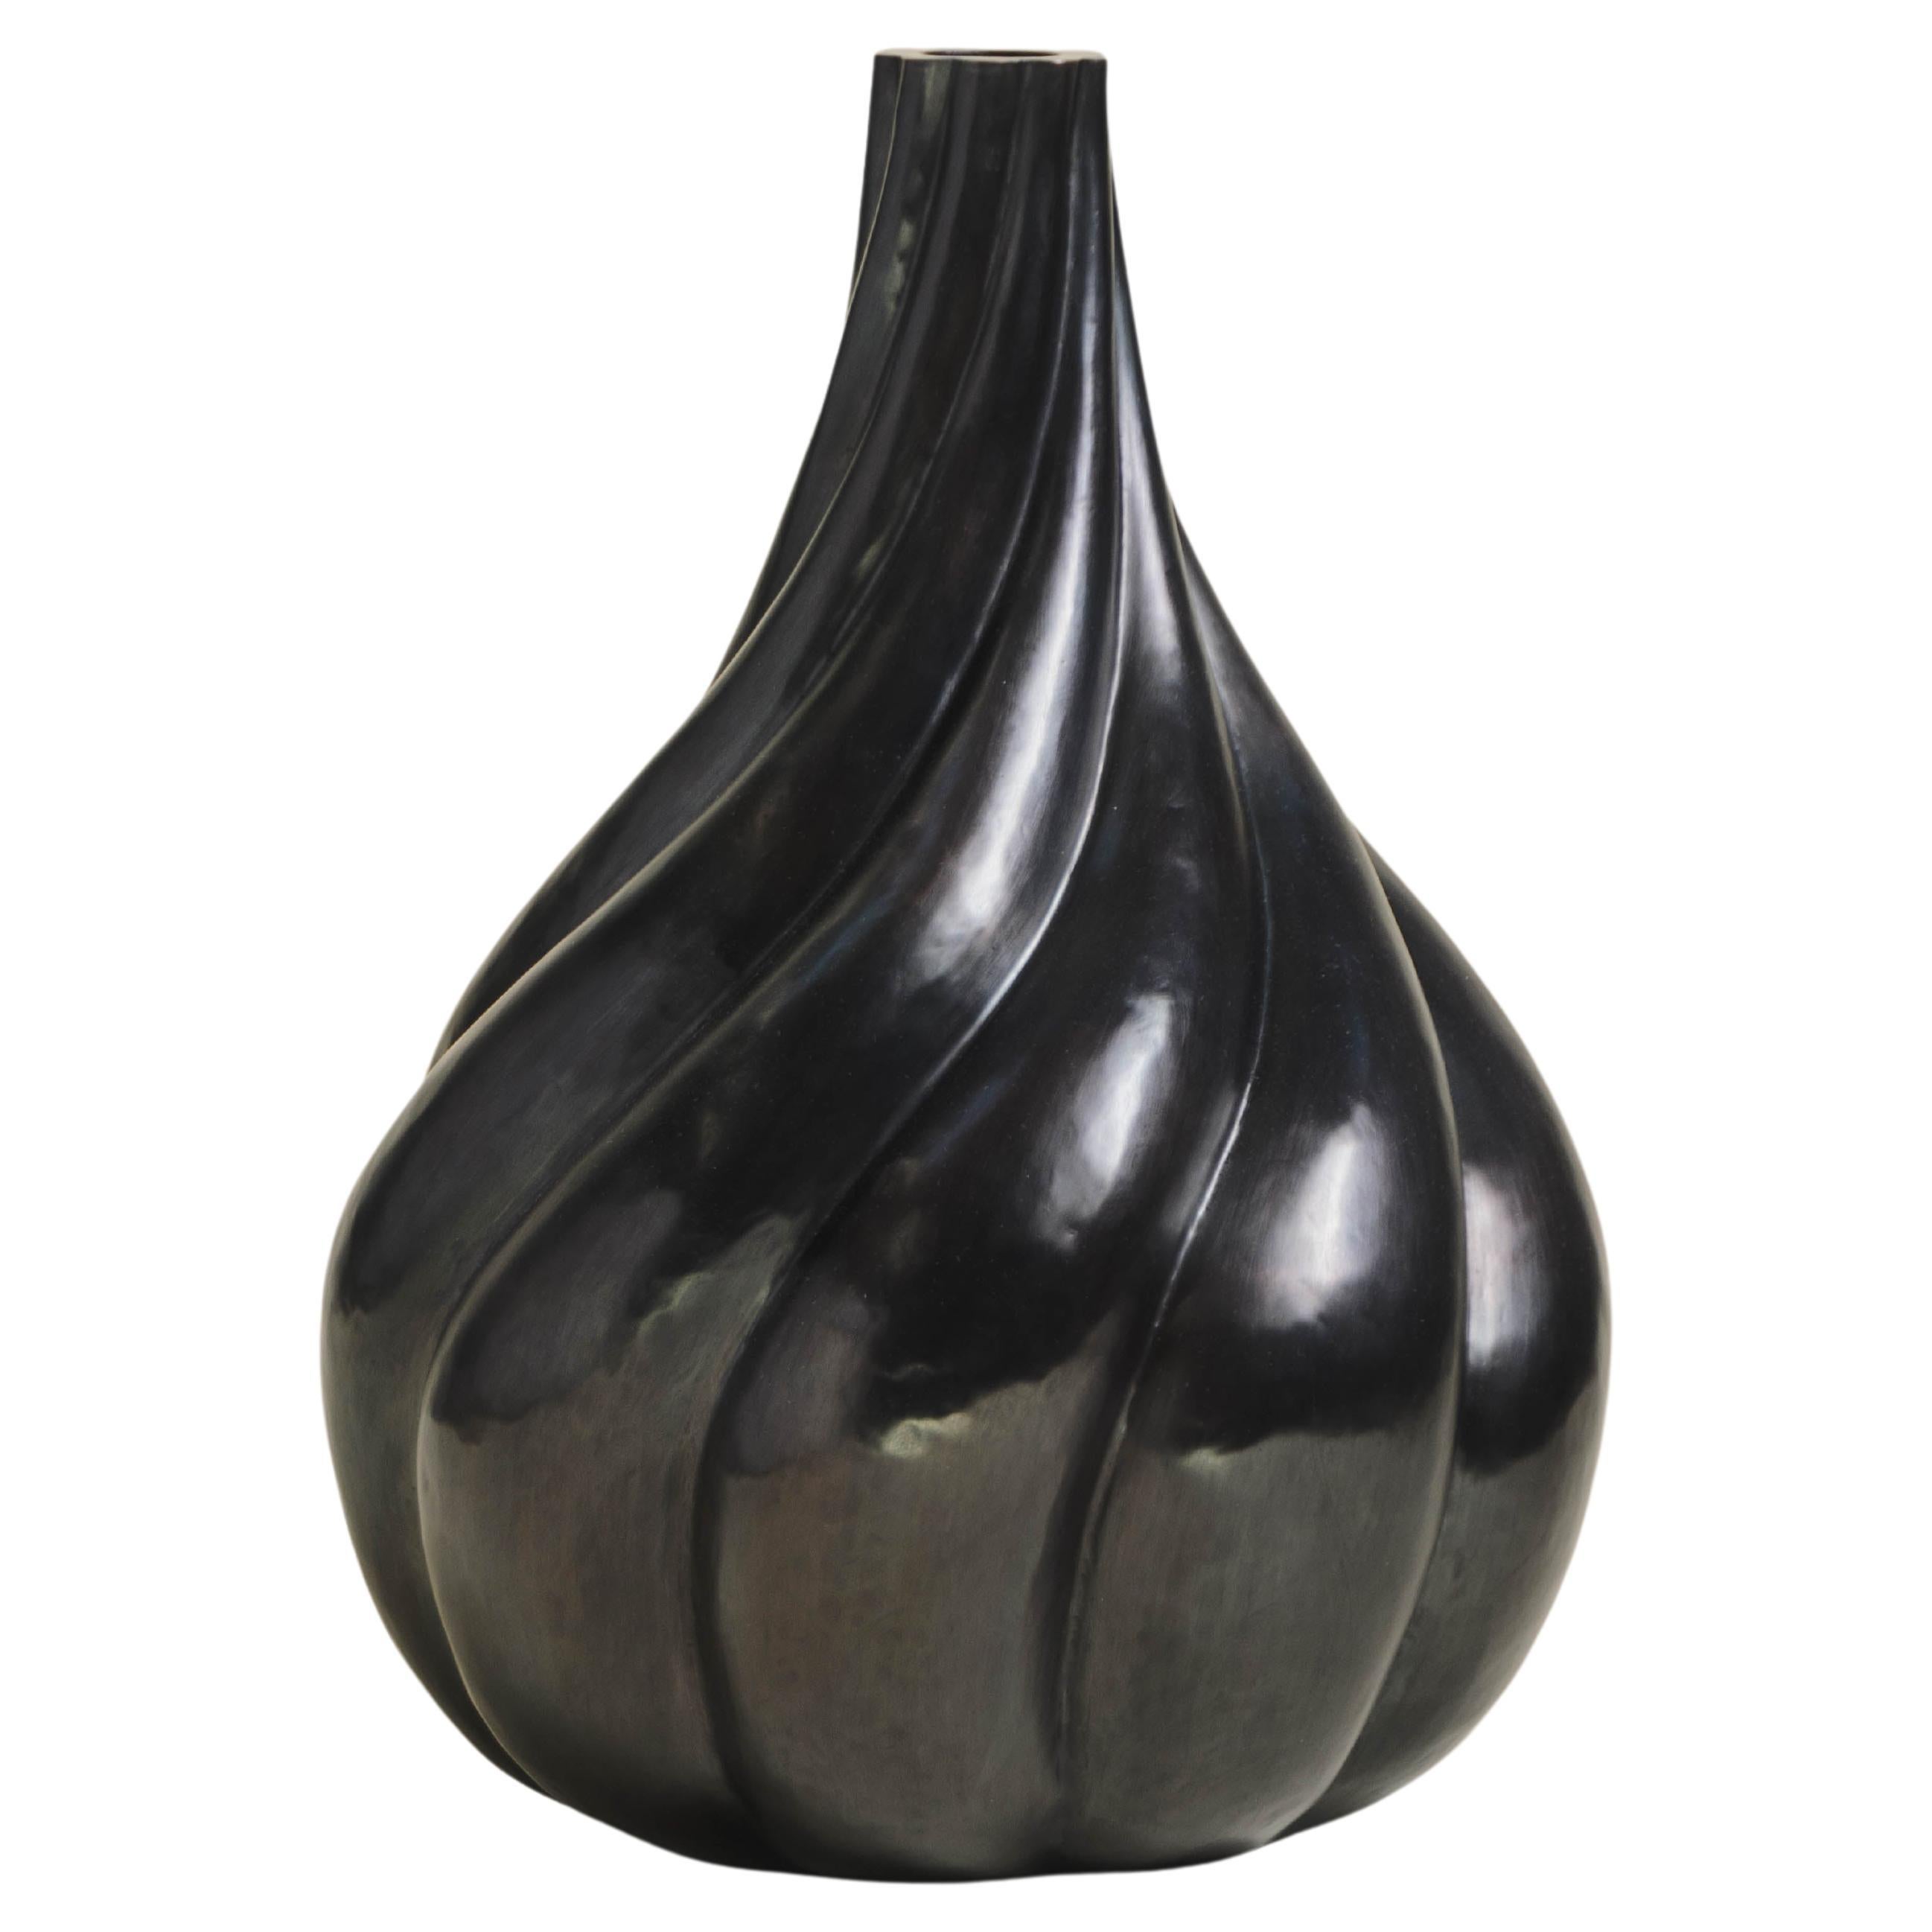 Hand Repoussé Swirl Vase in Black Copper by Robert Kuo, Contemporary For Sale